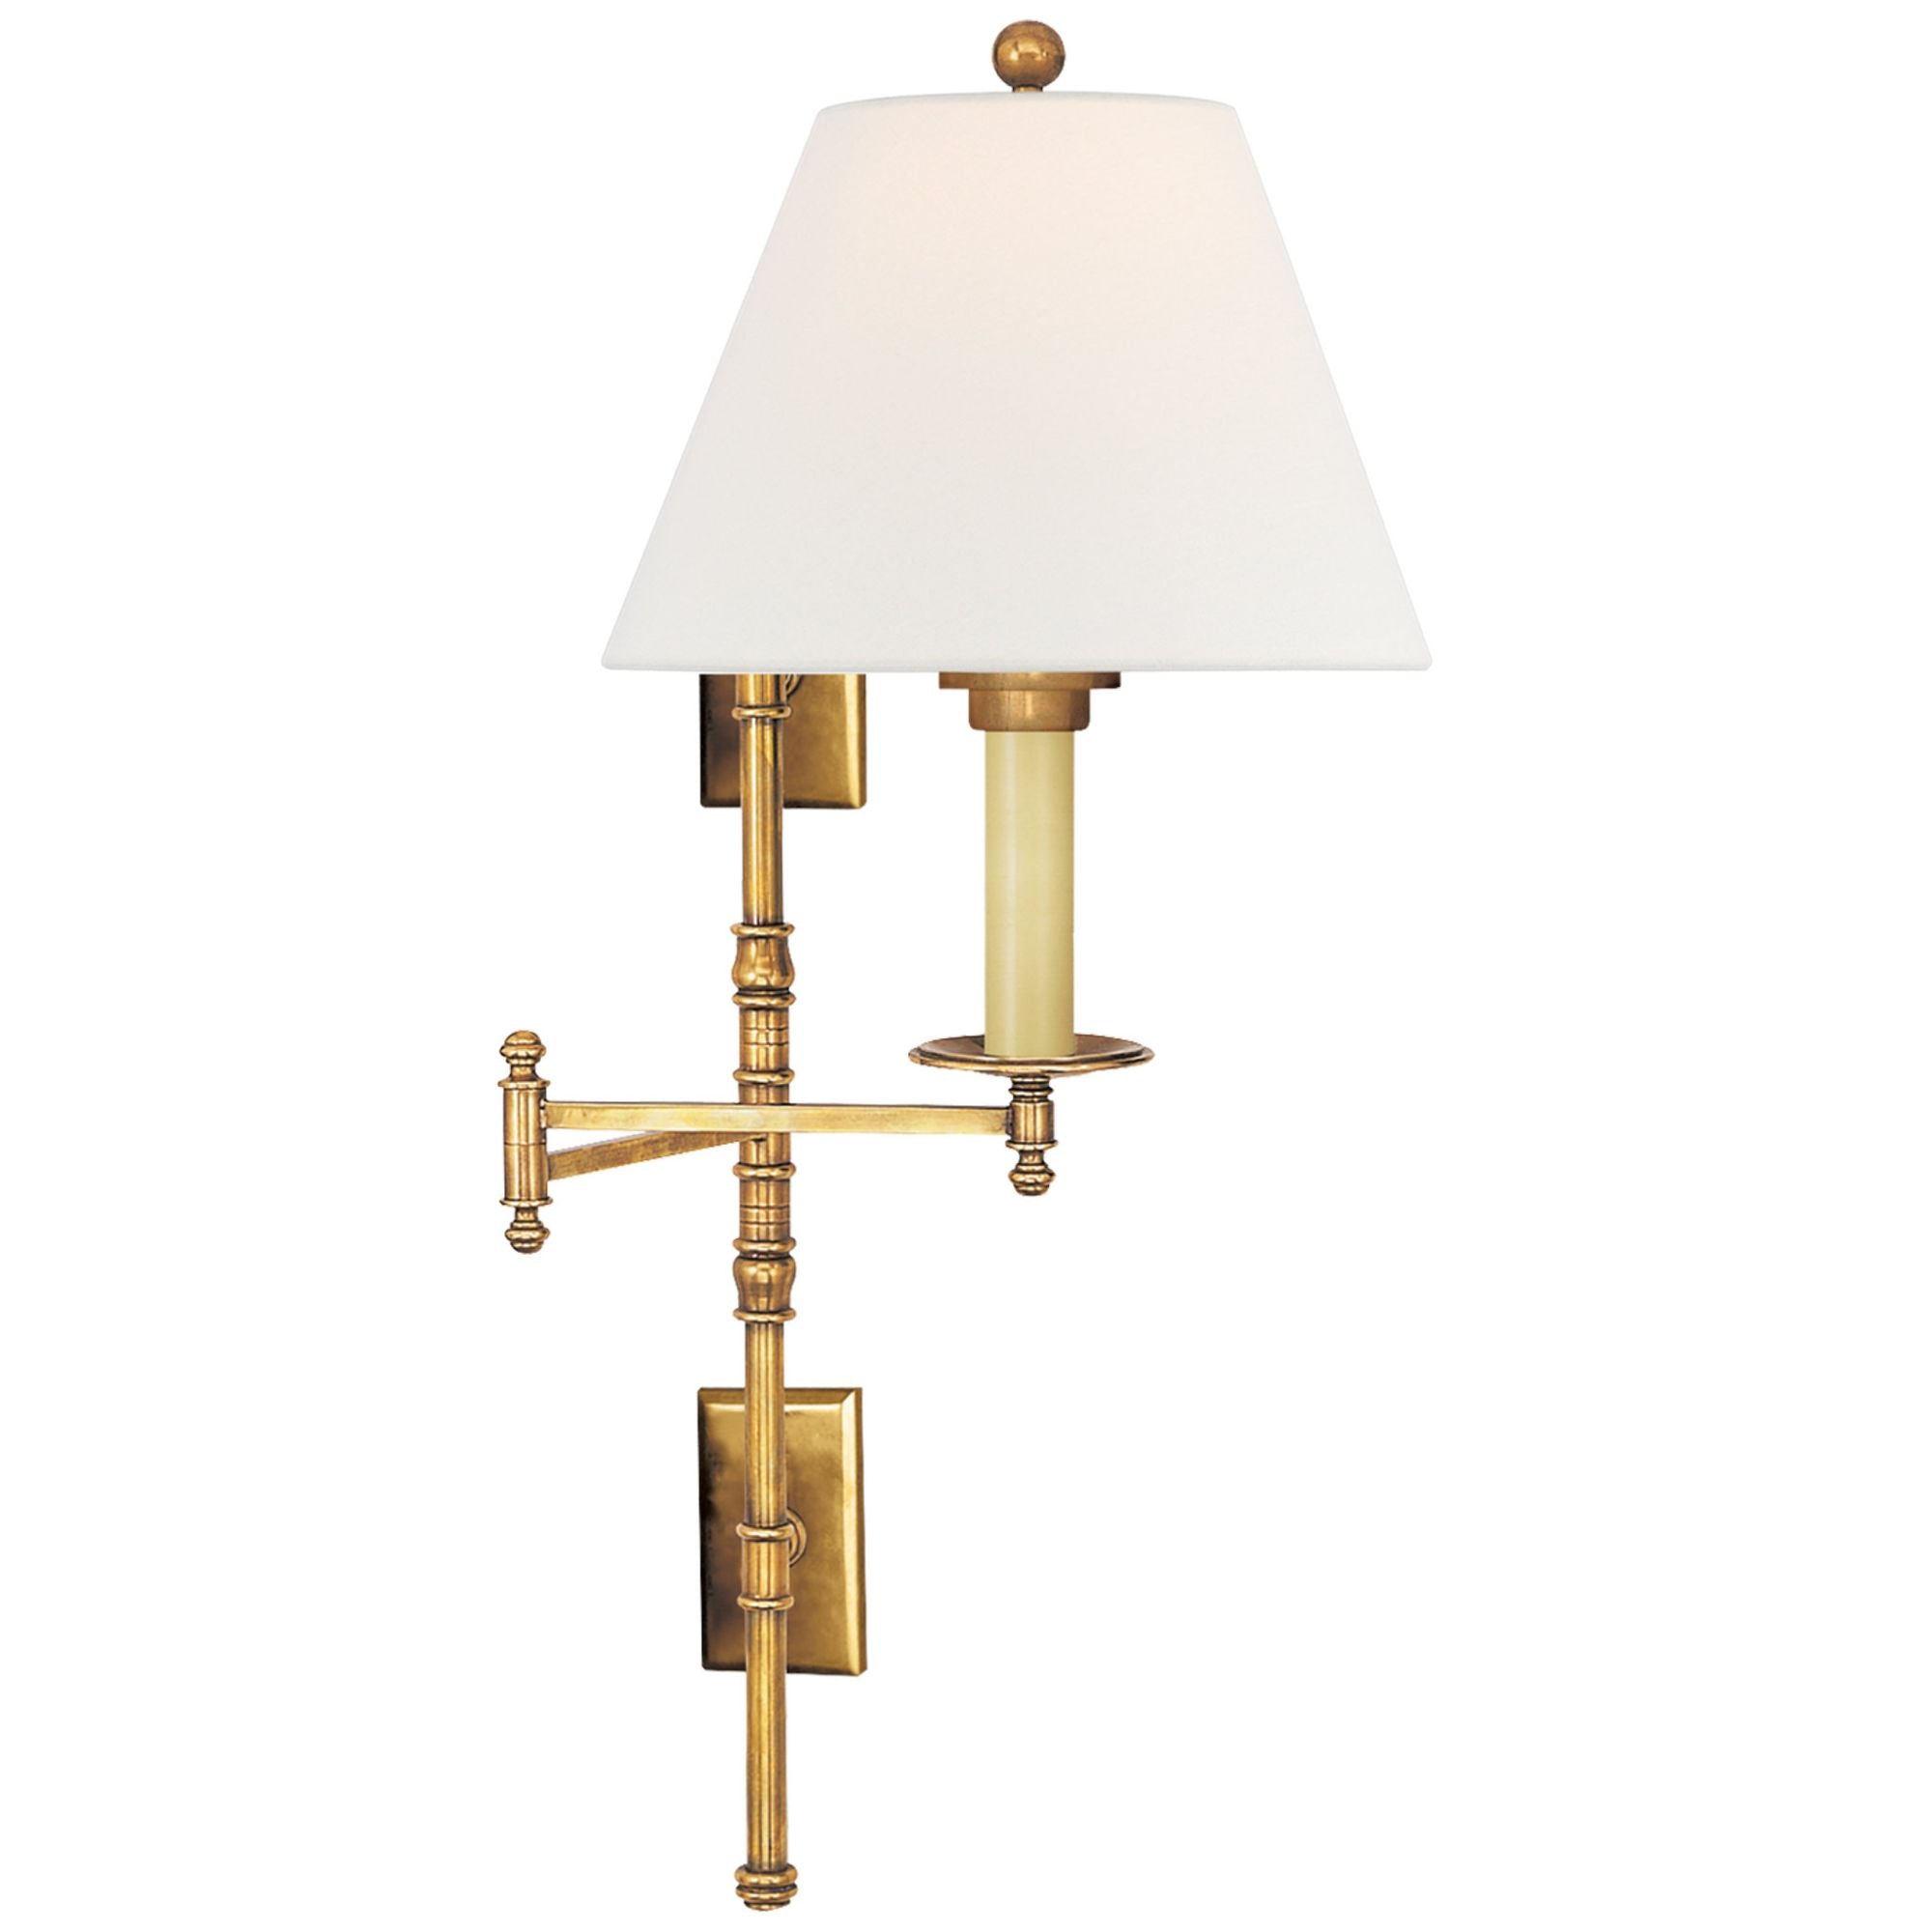 Chapman & Myers Boston Swing Arm in Hand-Rubbed Antique Brass with SLE Shade